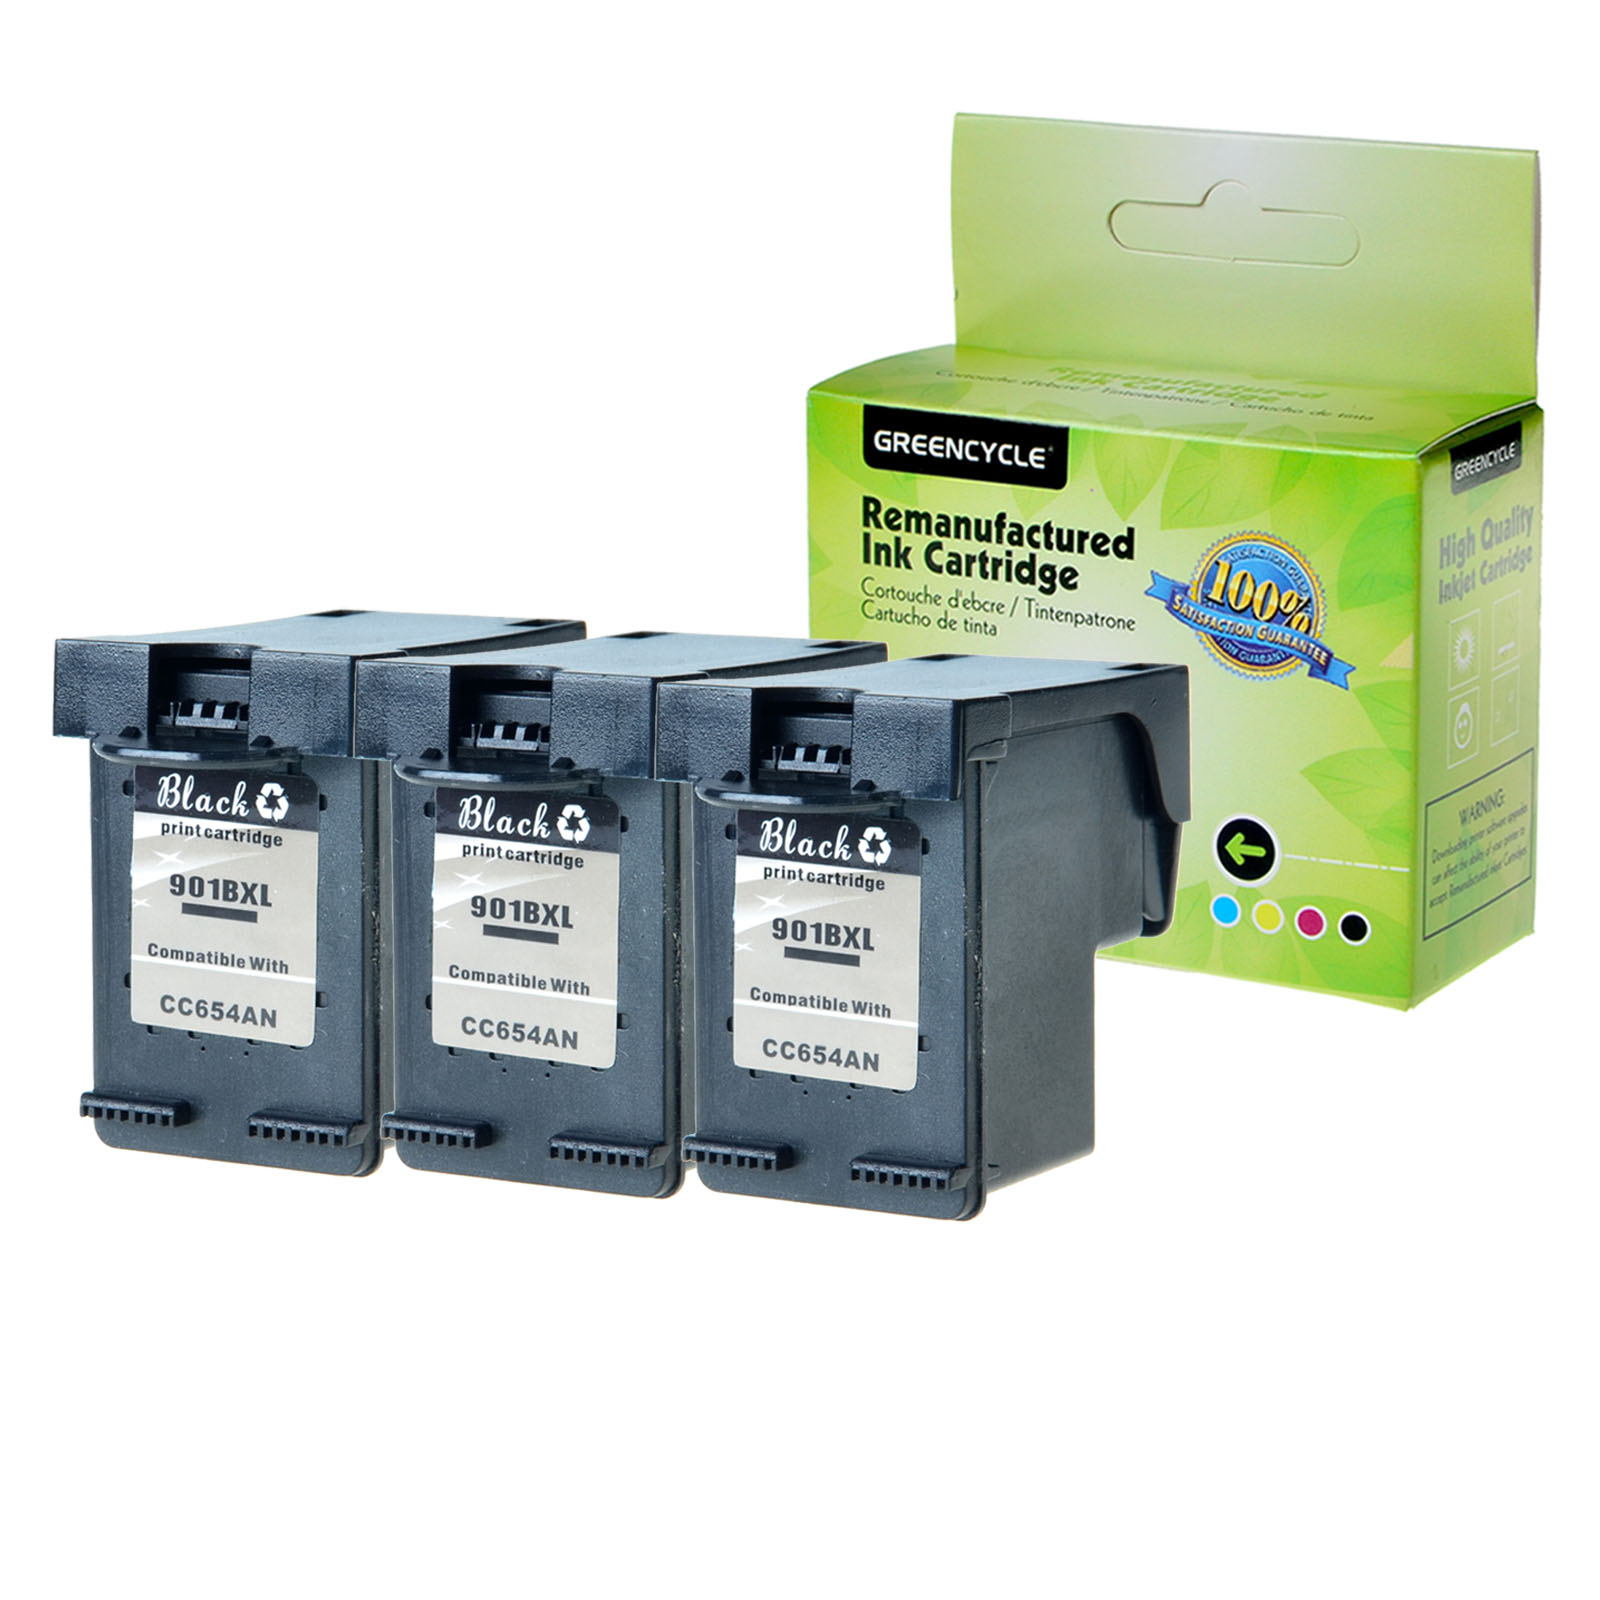 GREENCYCLE 3PK Remanufactured 901XL 901 XL CC654AN Black Ink Cartridge Compatible for HP Officejet G510a J4524 4500 Printer